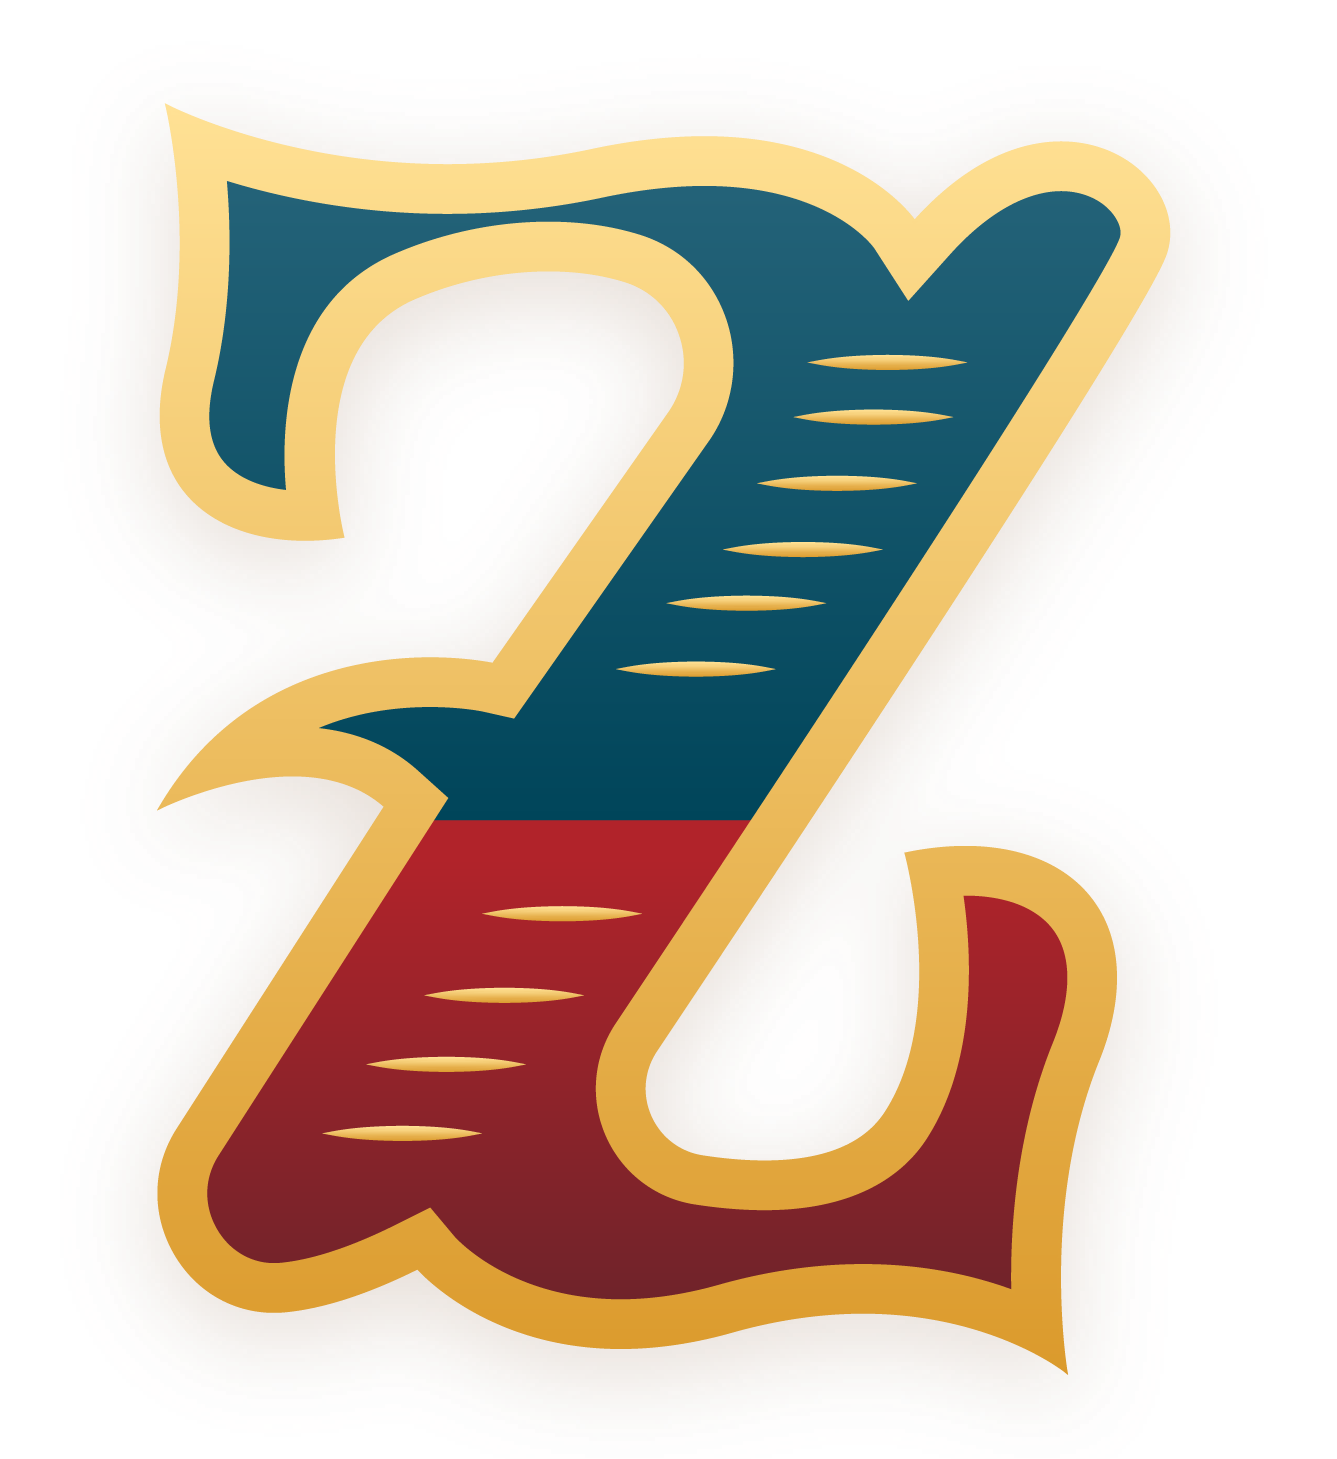 Letter Z PNG HD Free Image